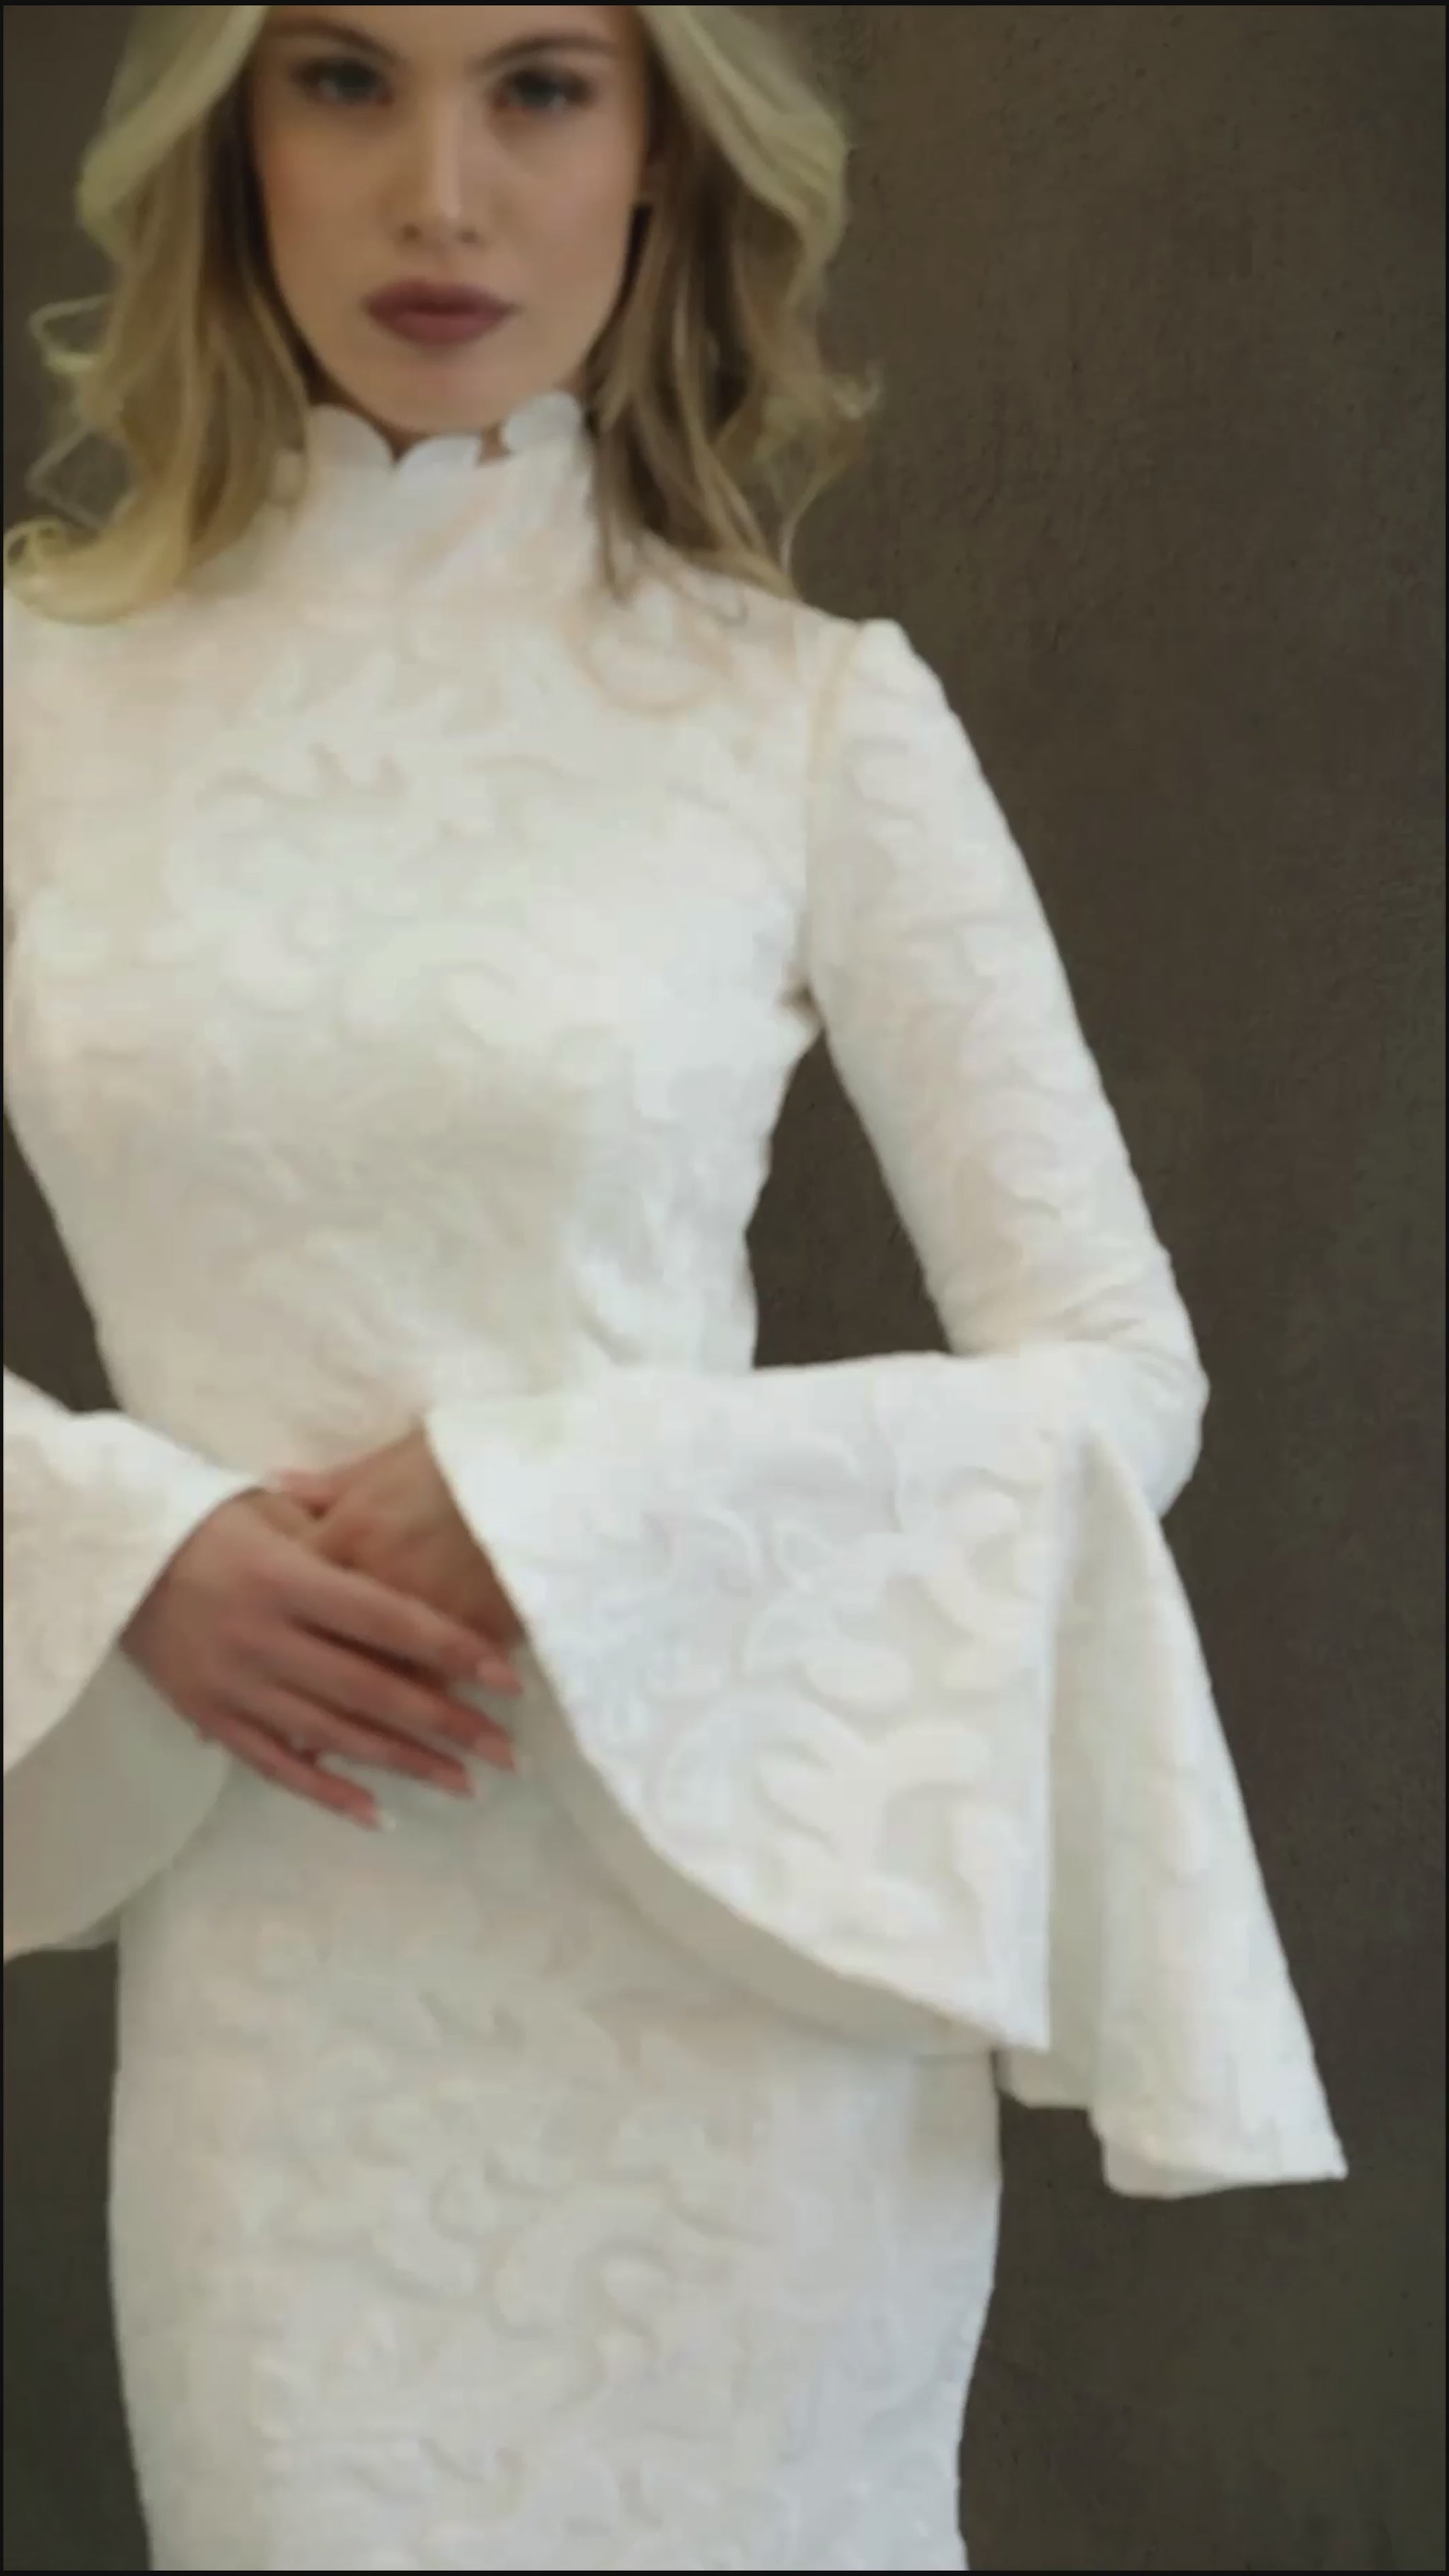 Winter lace wedding dress made in fit and flare silhouette. It's fully lined and has bell sleeves and turtle neckline.